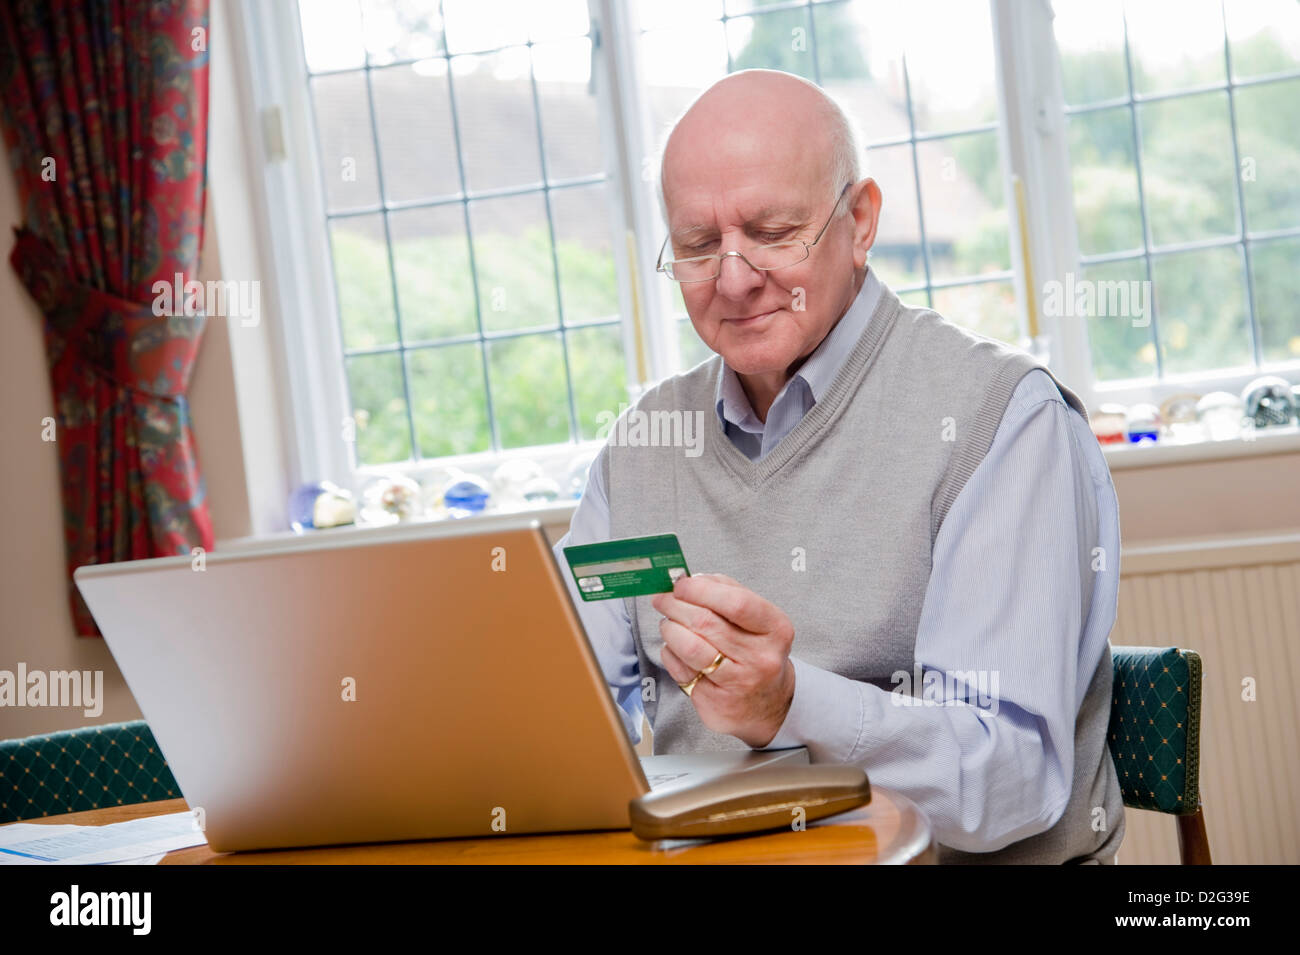 Senior man using laptop to pay bills / shopping online with a credit card Stock Photo